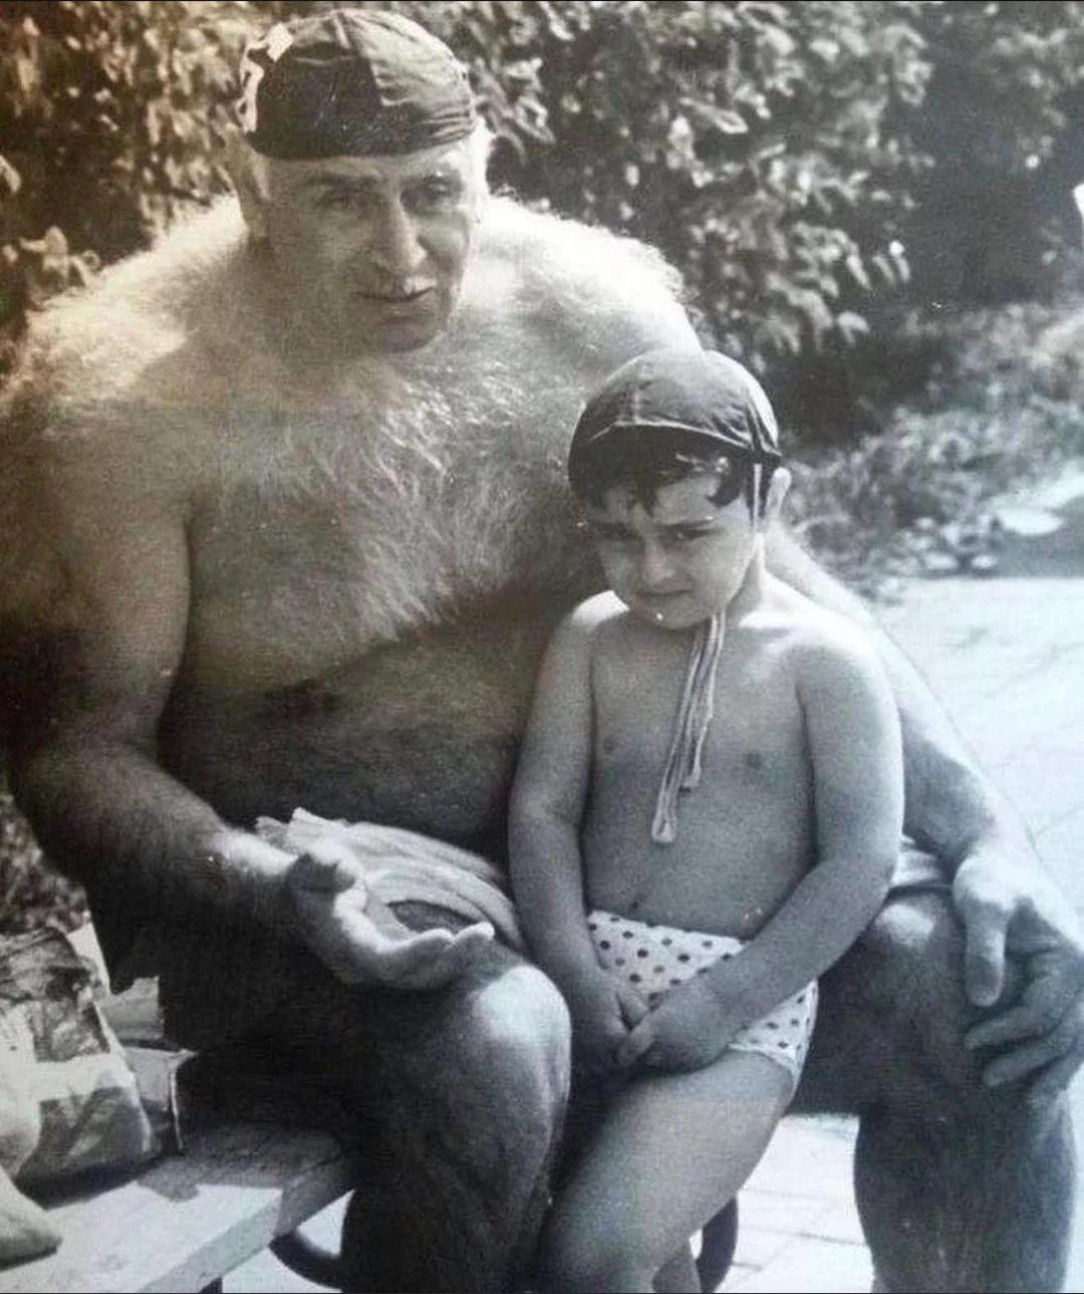 This legendary Soviet Georgian water polo player, Pyotr Mshvenieradze with his grandson, pic from 1990s